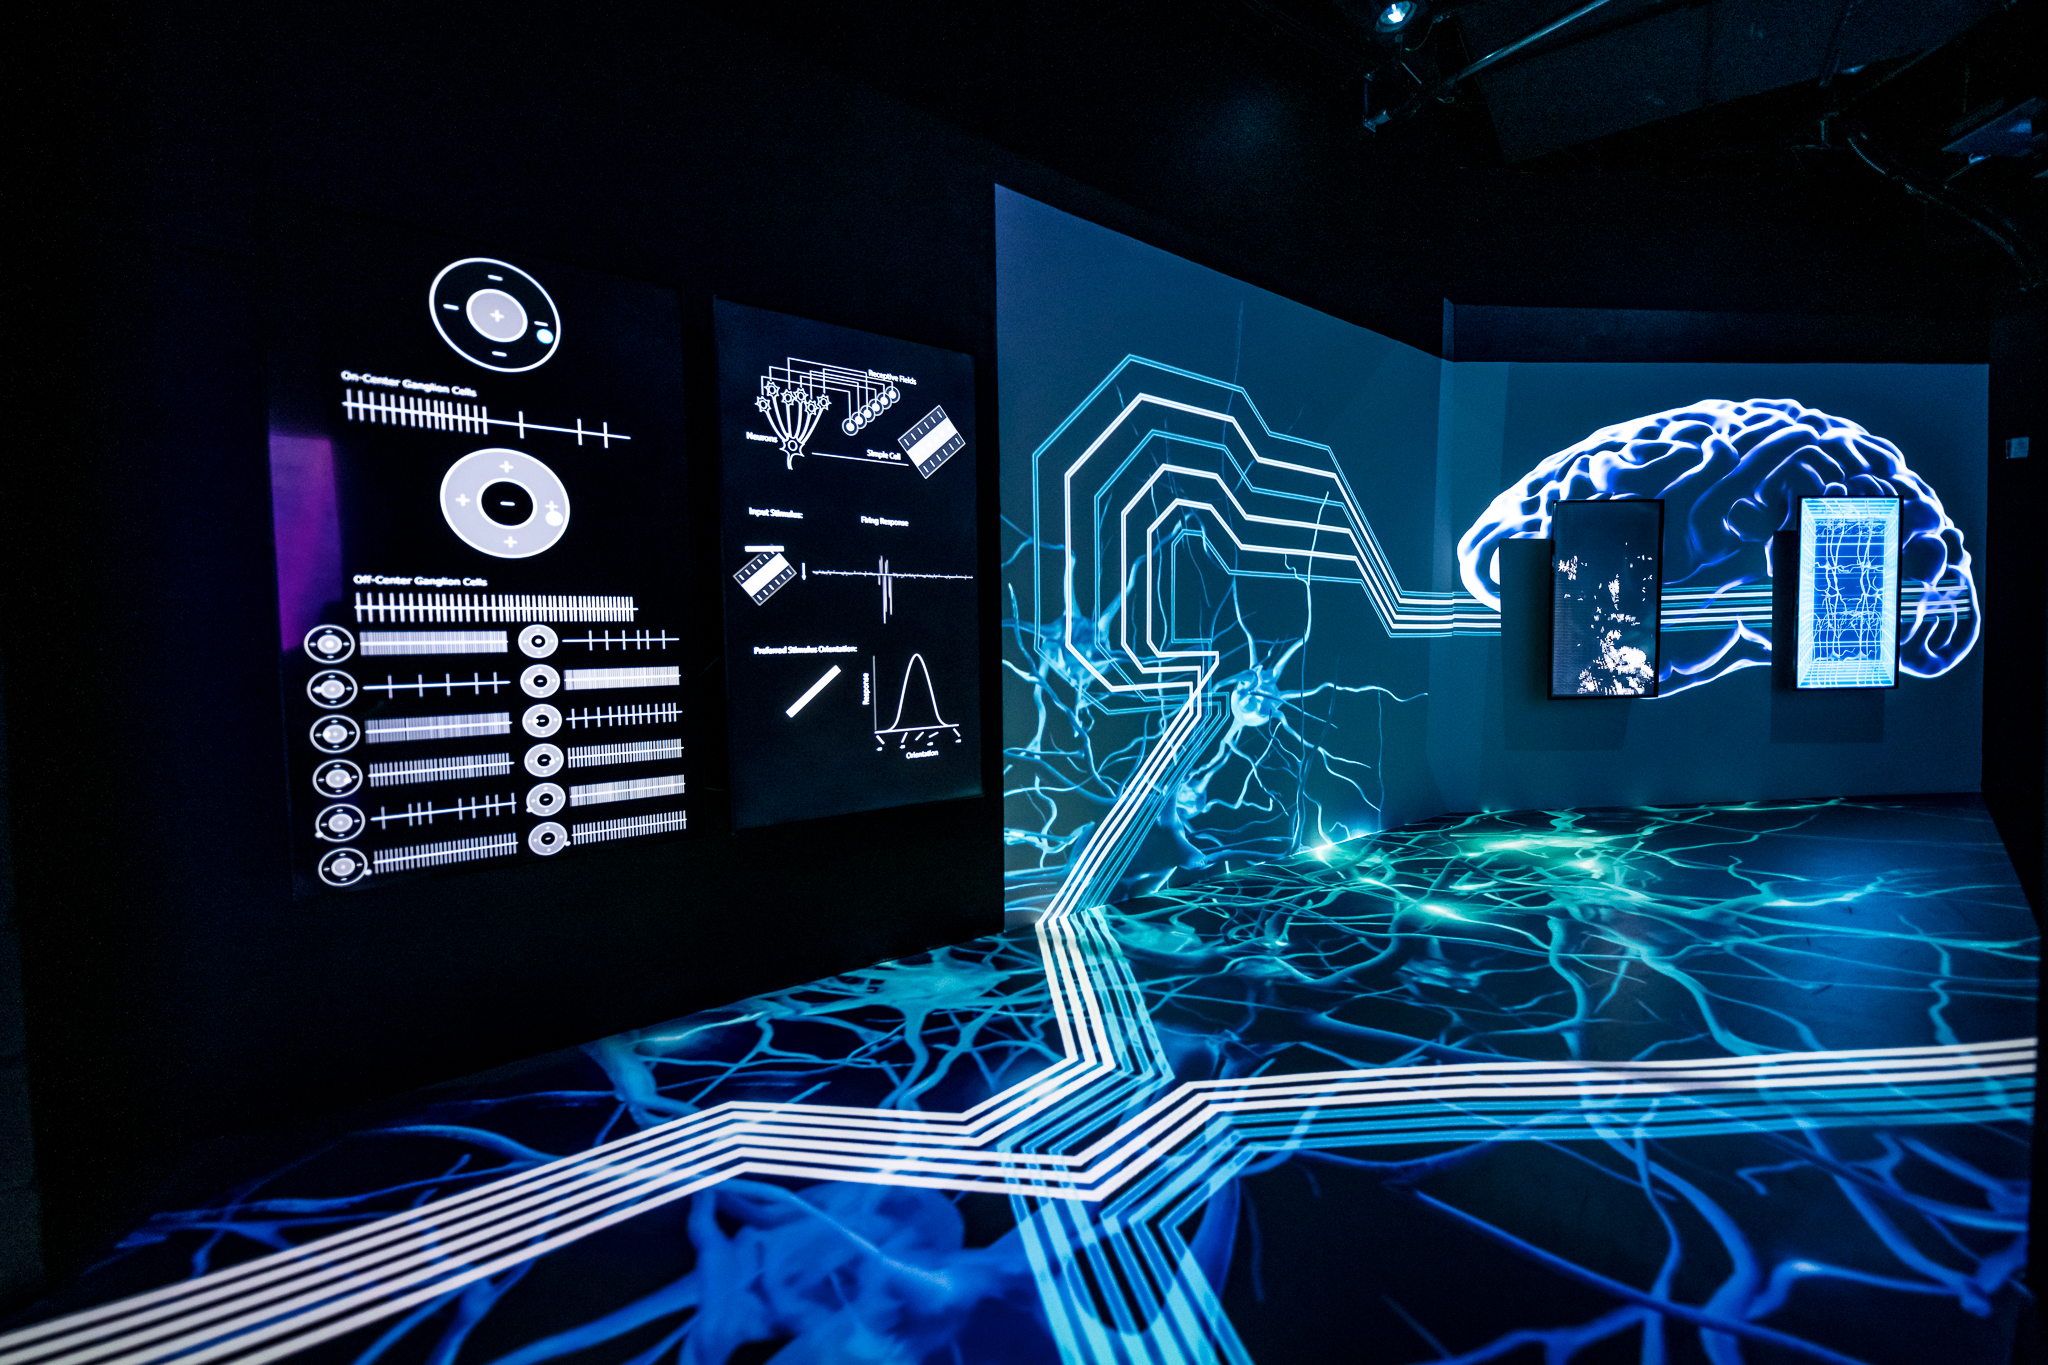 Image of an exhibit at ARTECHOUSE that depicts the process of vision.